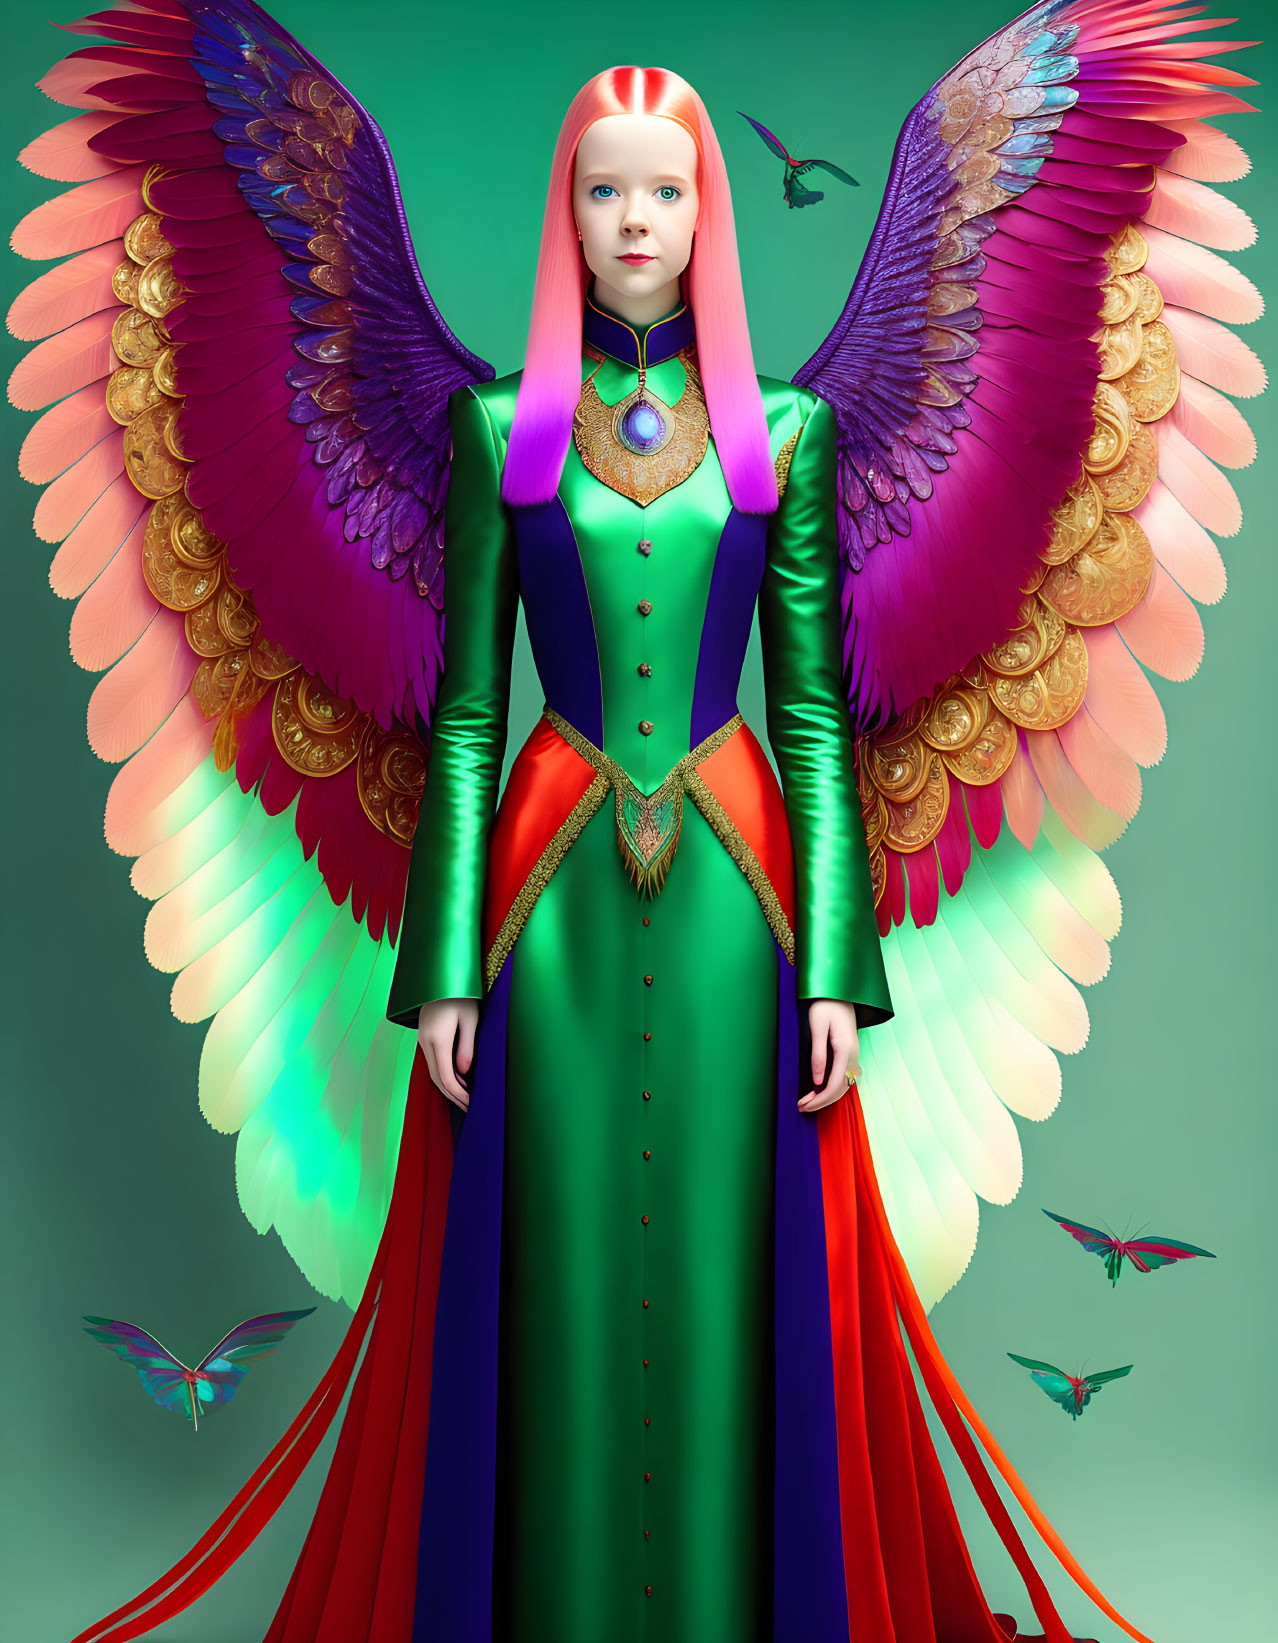 Vibrant illustration of a woman with colorful wings and ornate dress